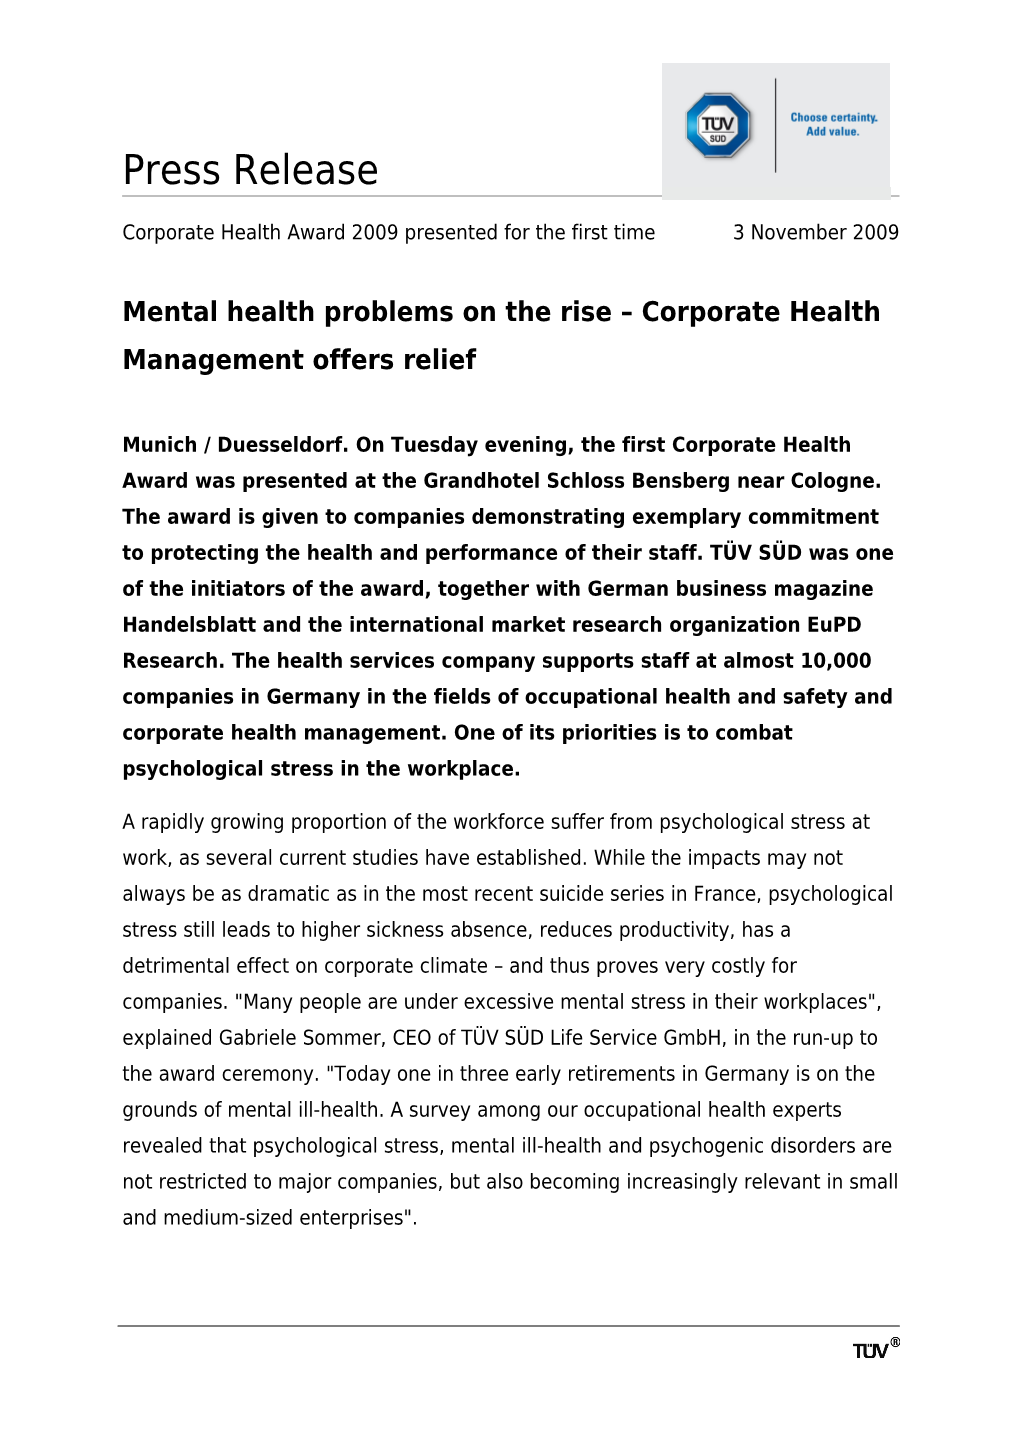 Mental Health Problems on the Rise Corporate Health Management Offers Relief